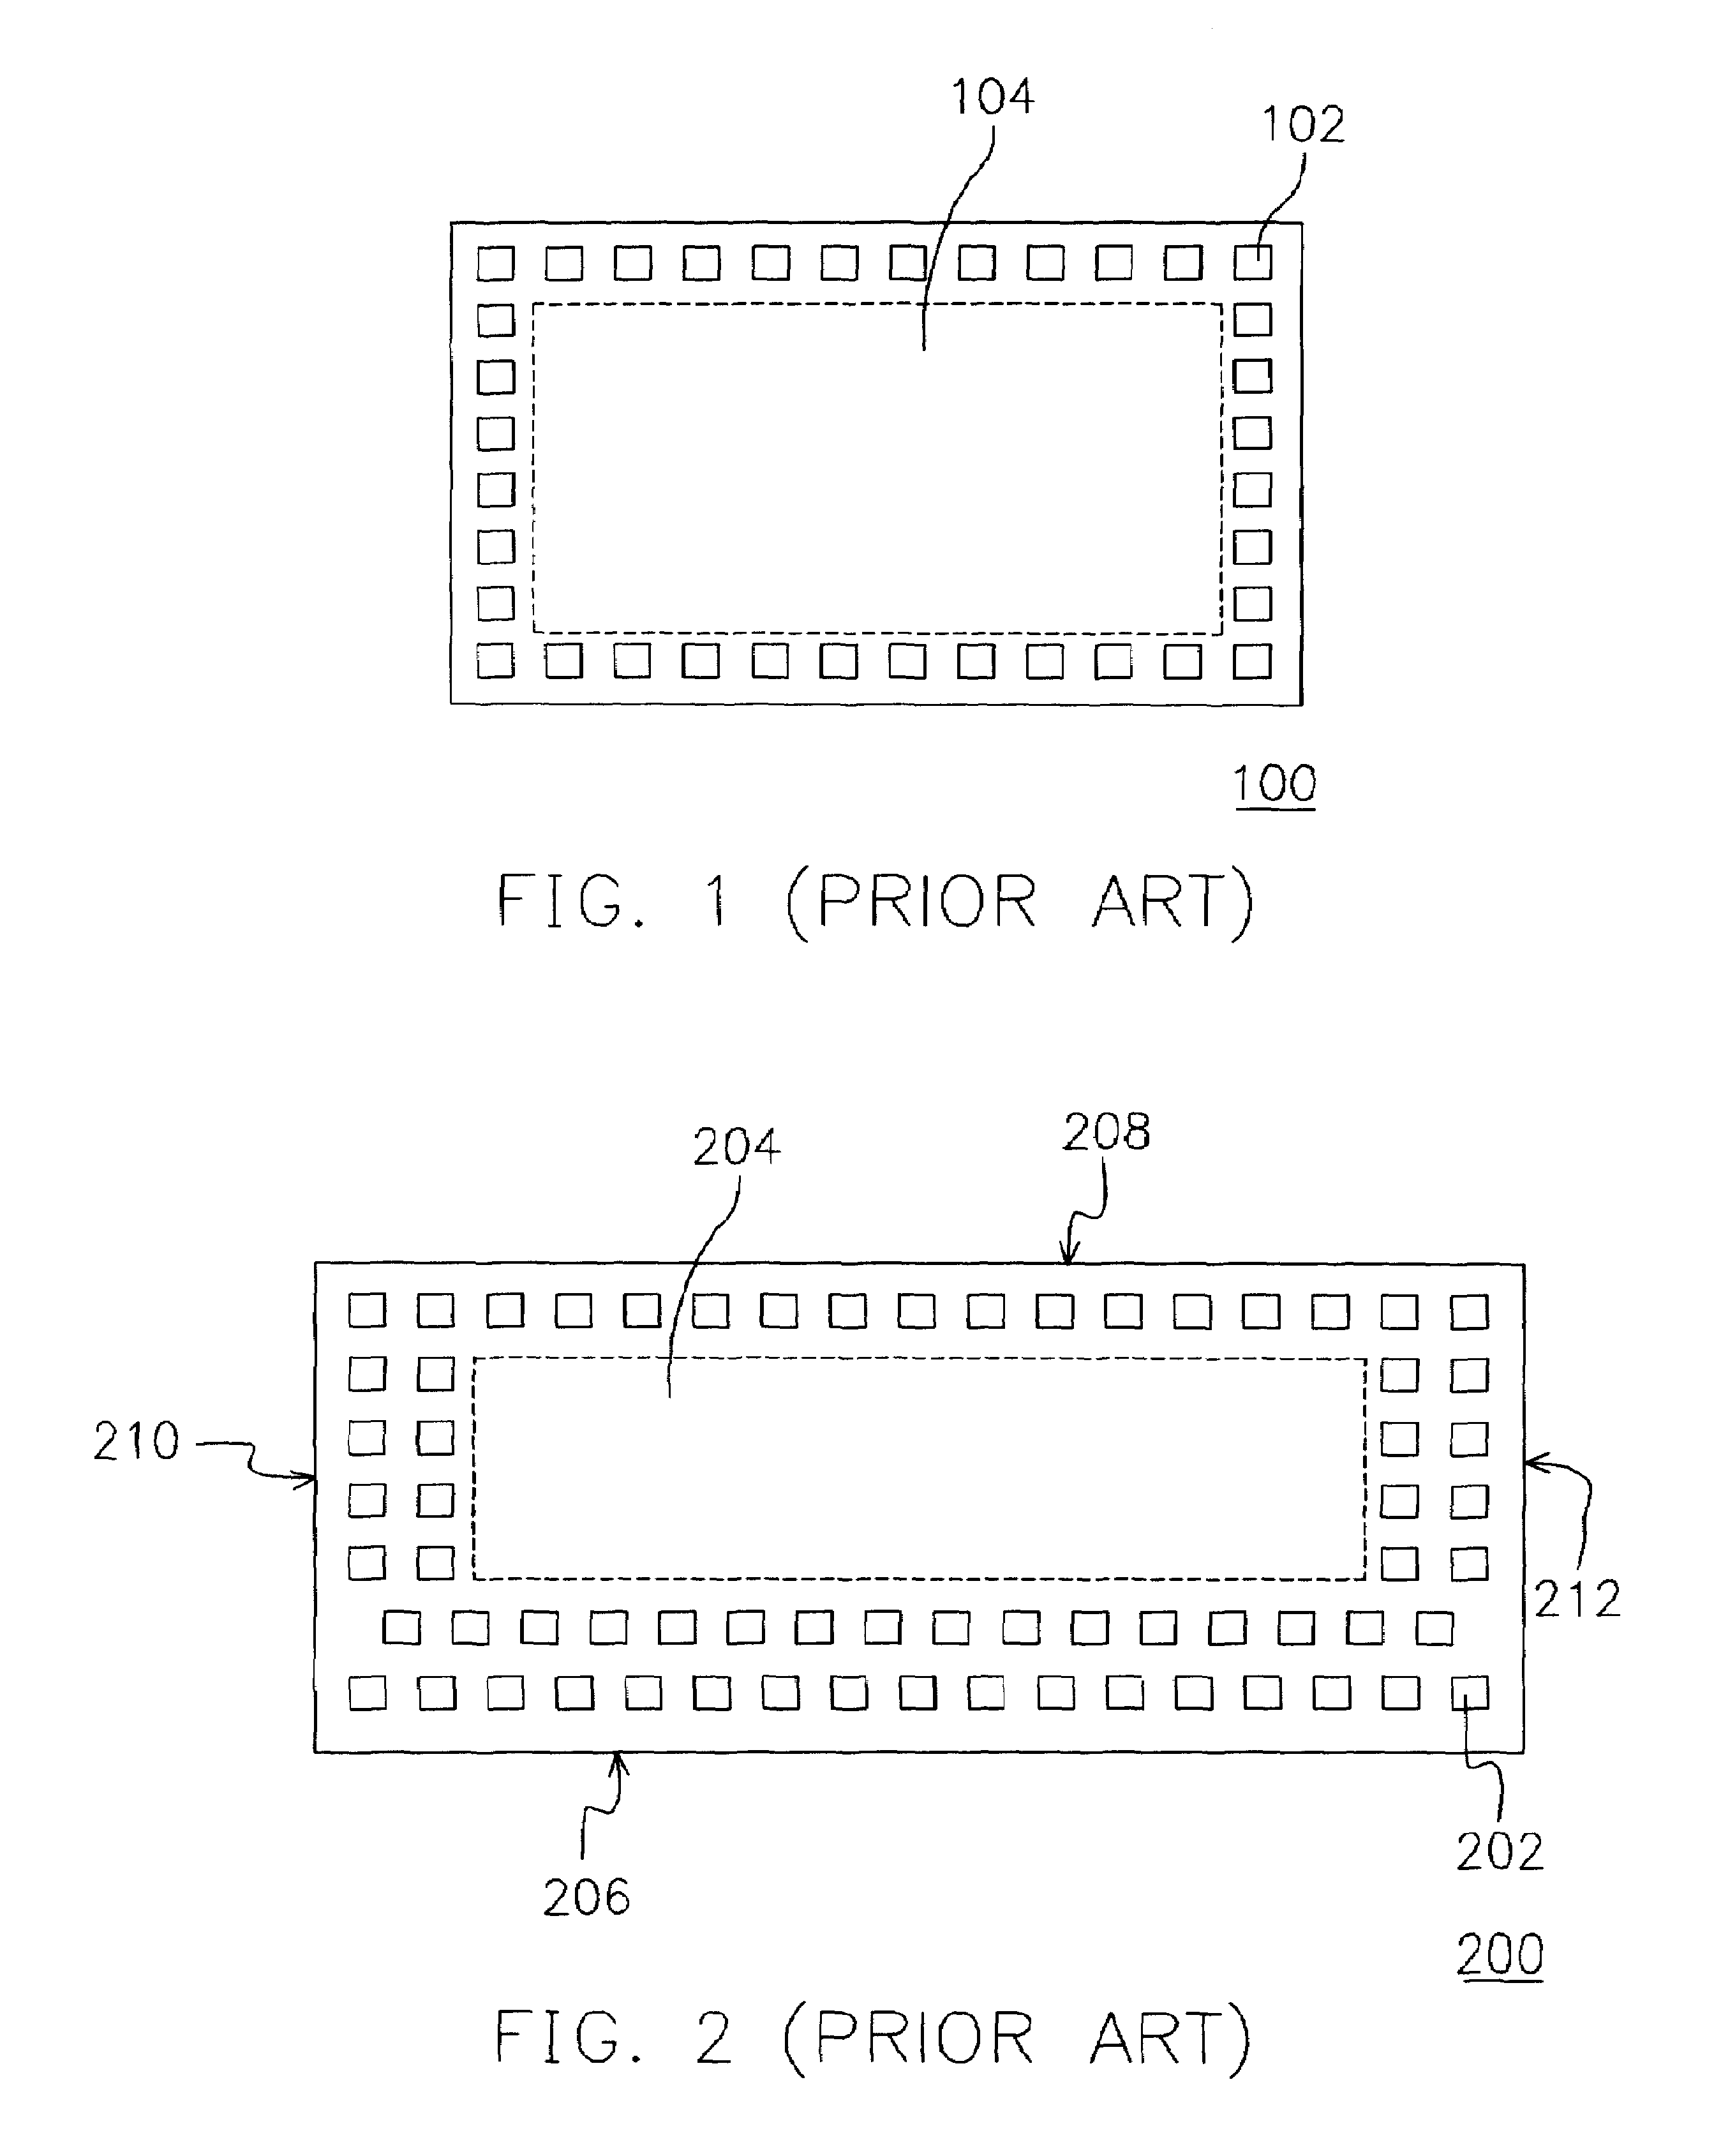 Bump layout on silicon chip